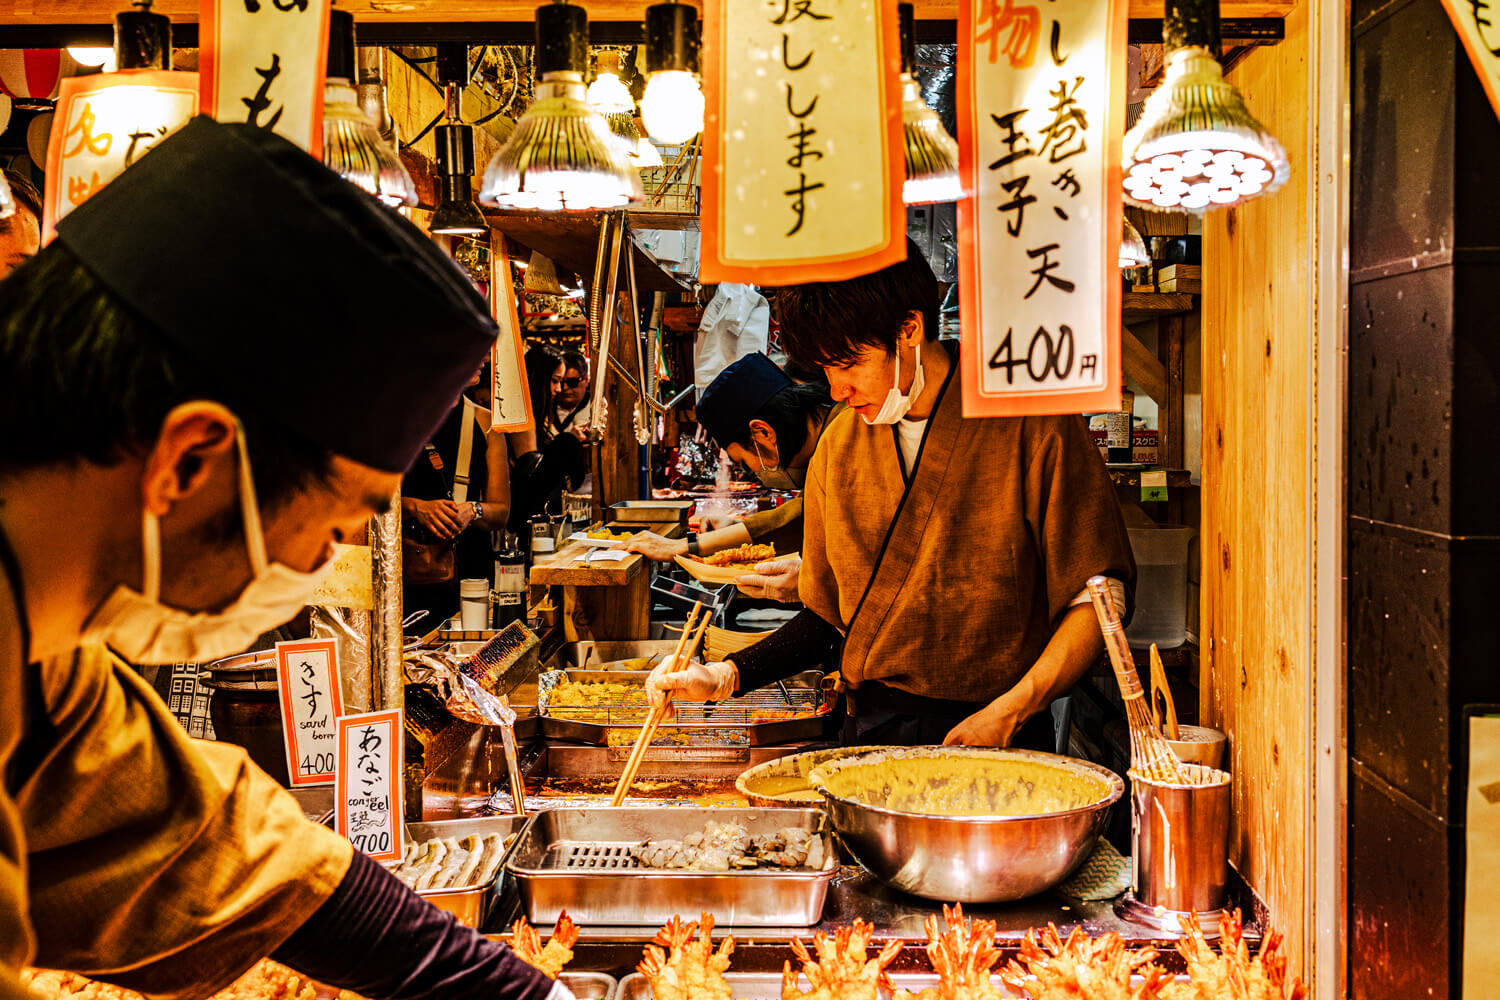 Bustling with activity, a Japanese street food stall glows warmly under hanging lamps, with chefs in traditional attire busily preparing food. Lanterns with Japanese script hang above, and an array of seafood is on display, inviting passersby to indulge in the local cuisine.